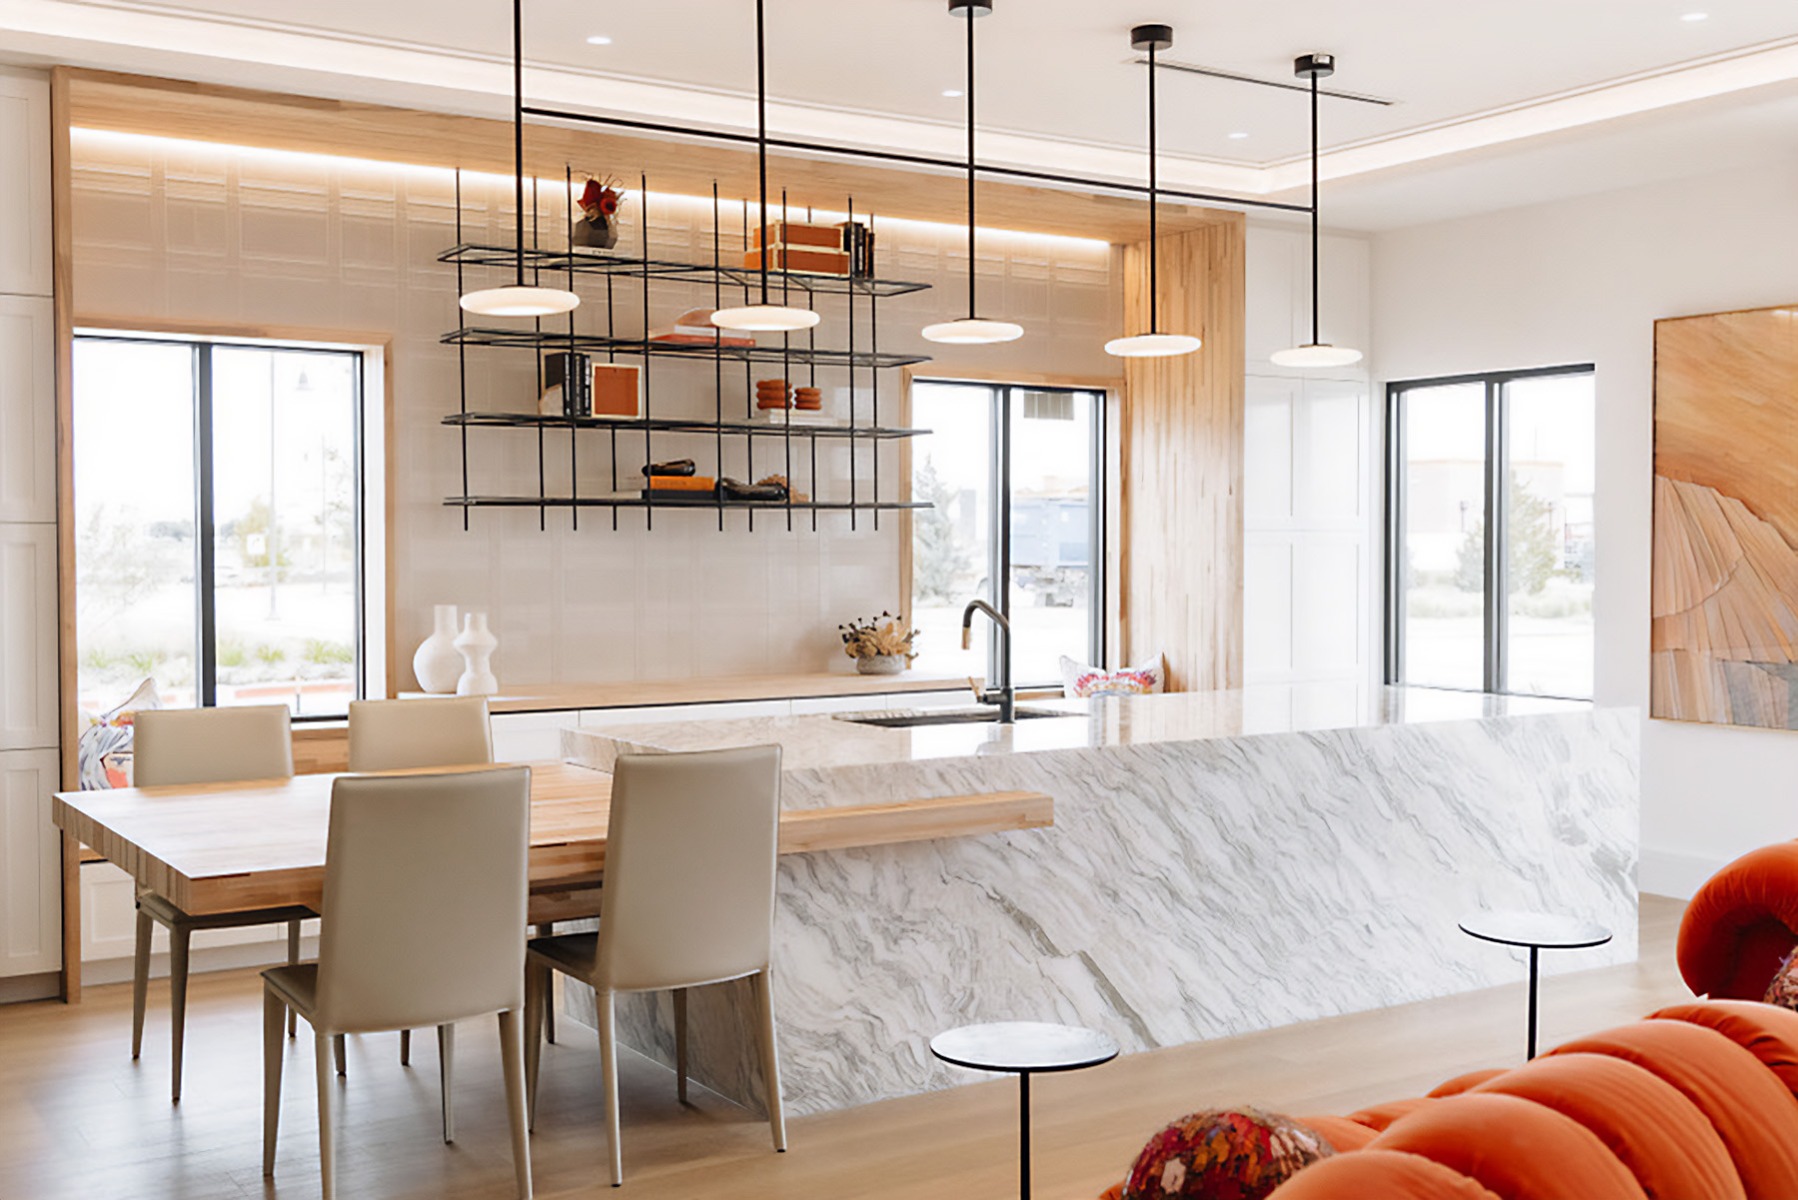 A 5-light pendant light hangs over the HBHQ office kitchen island, providing task lighting, with linear recessed and round recessed lights affording general lighting